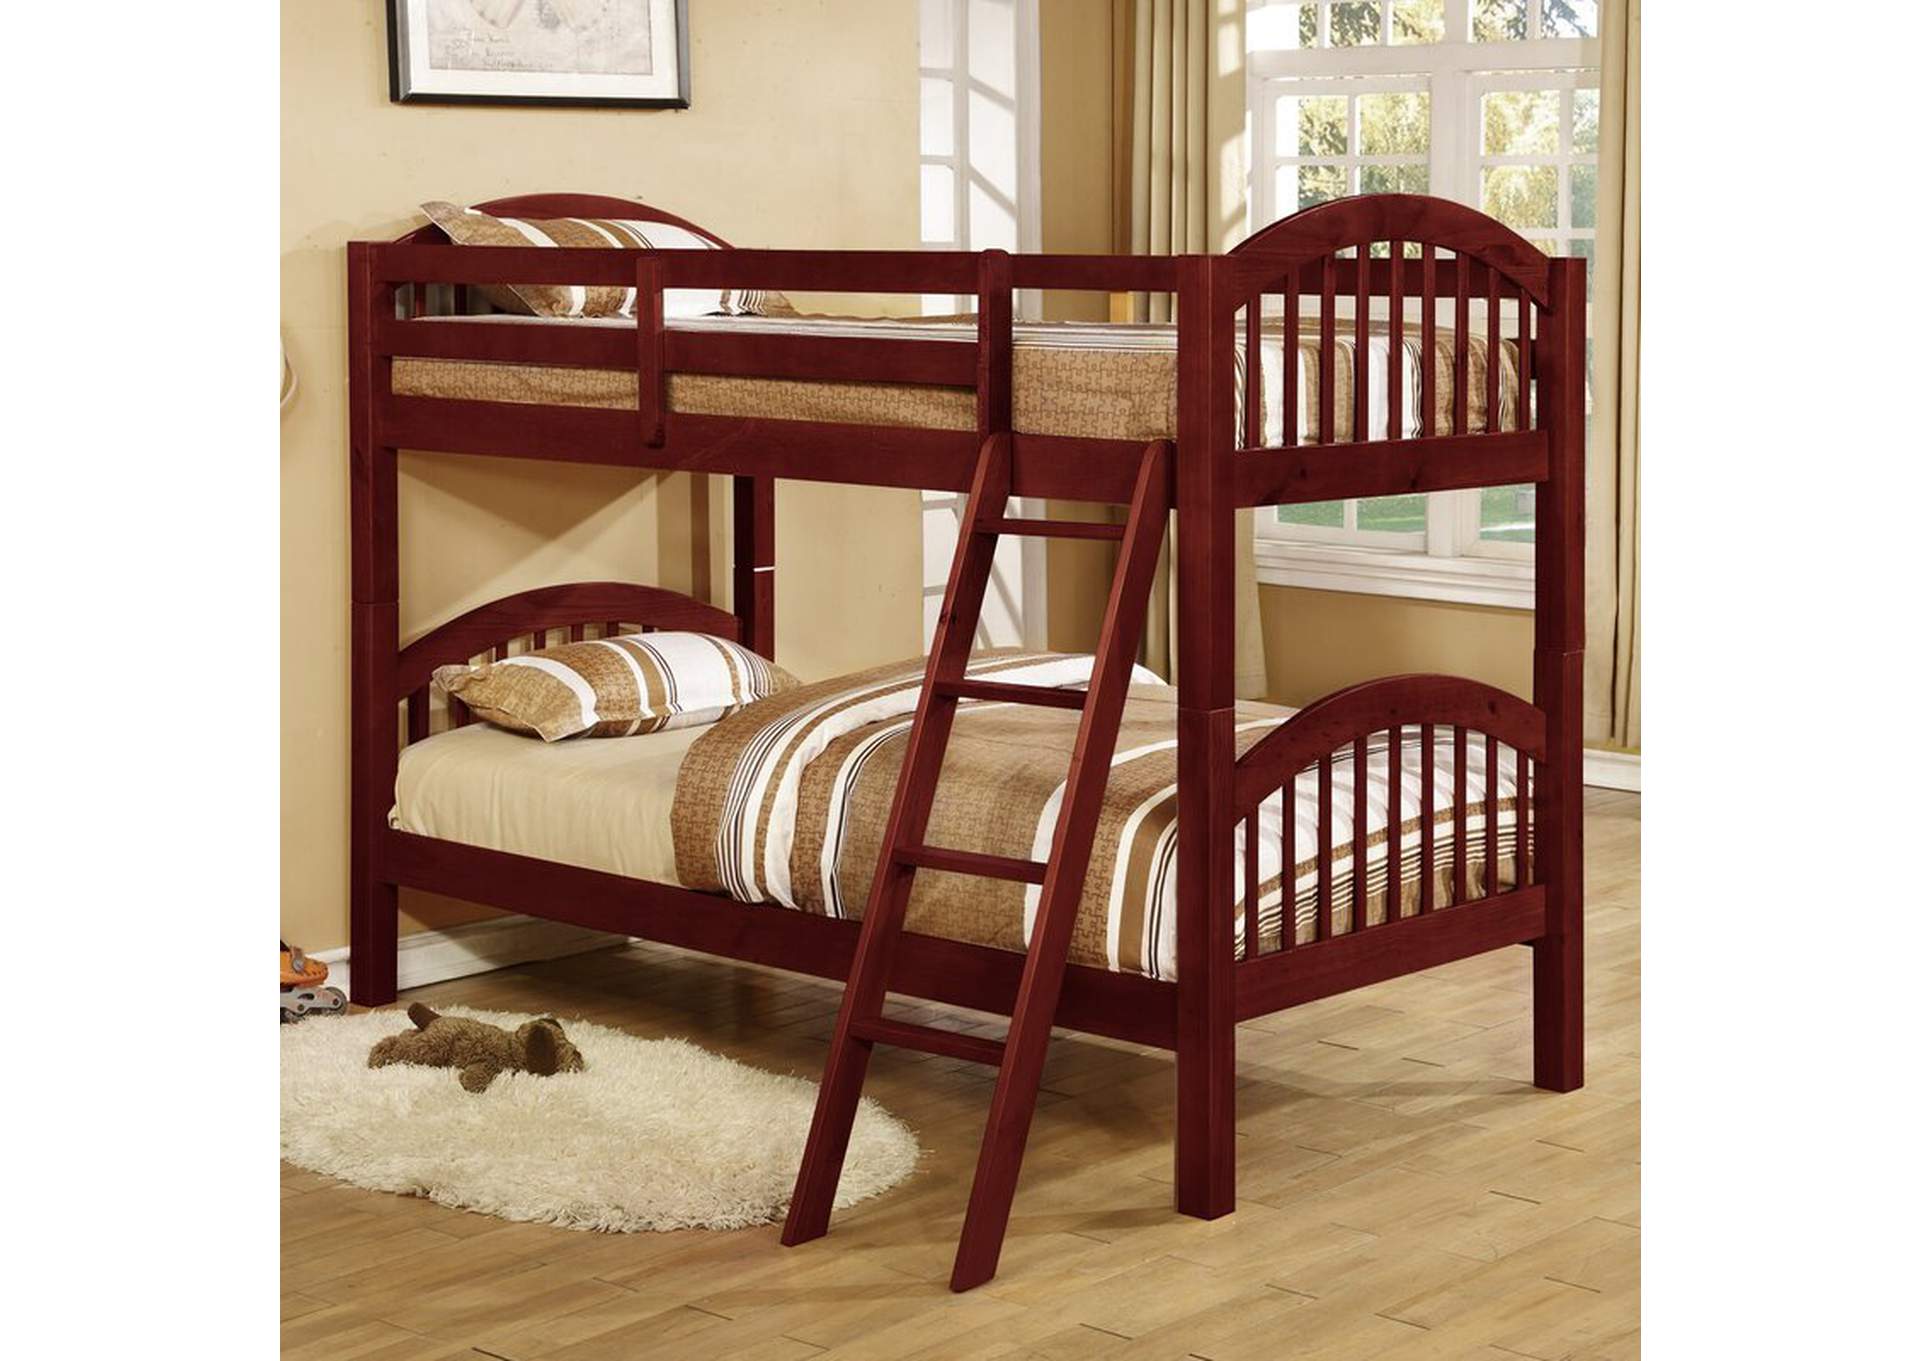 4472C Cherry Twin - Twin Bunk Bed,Global Trading